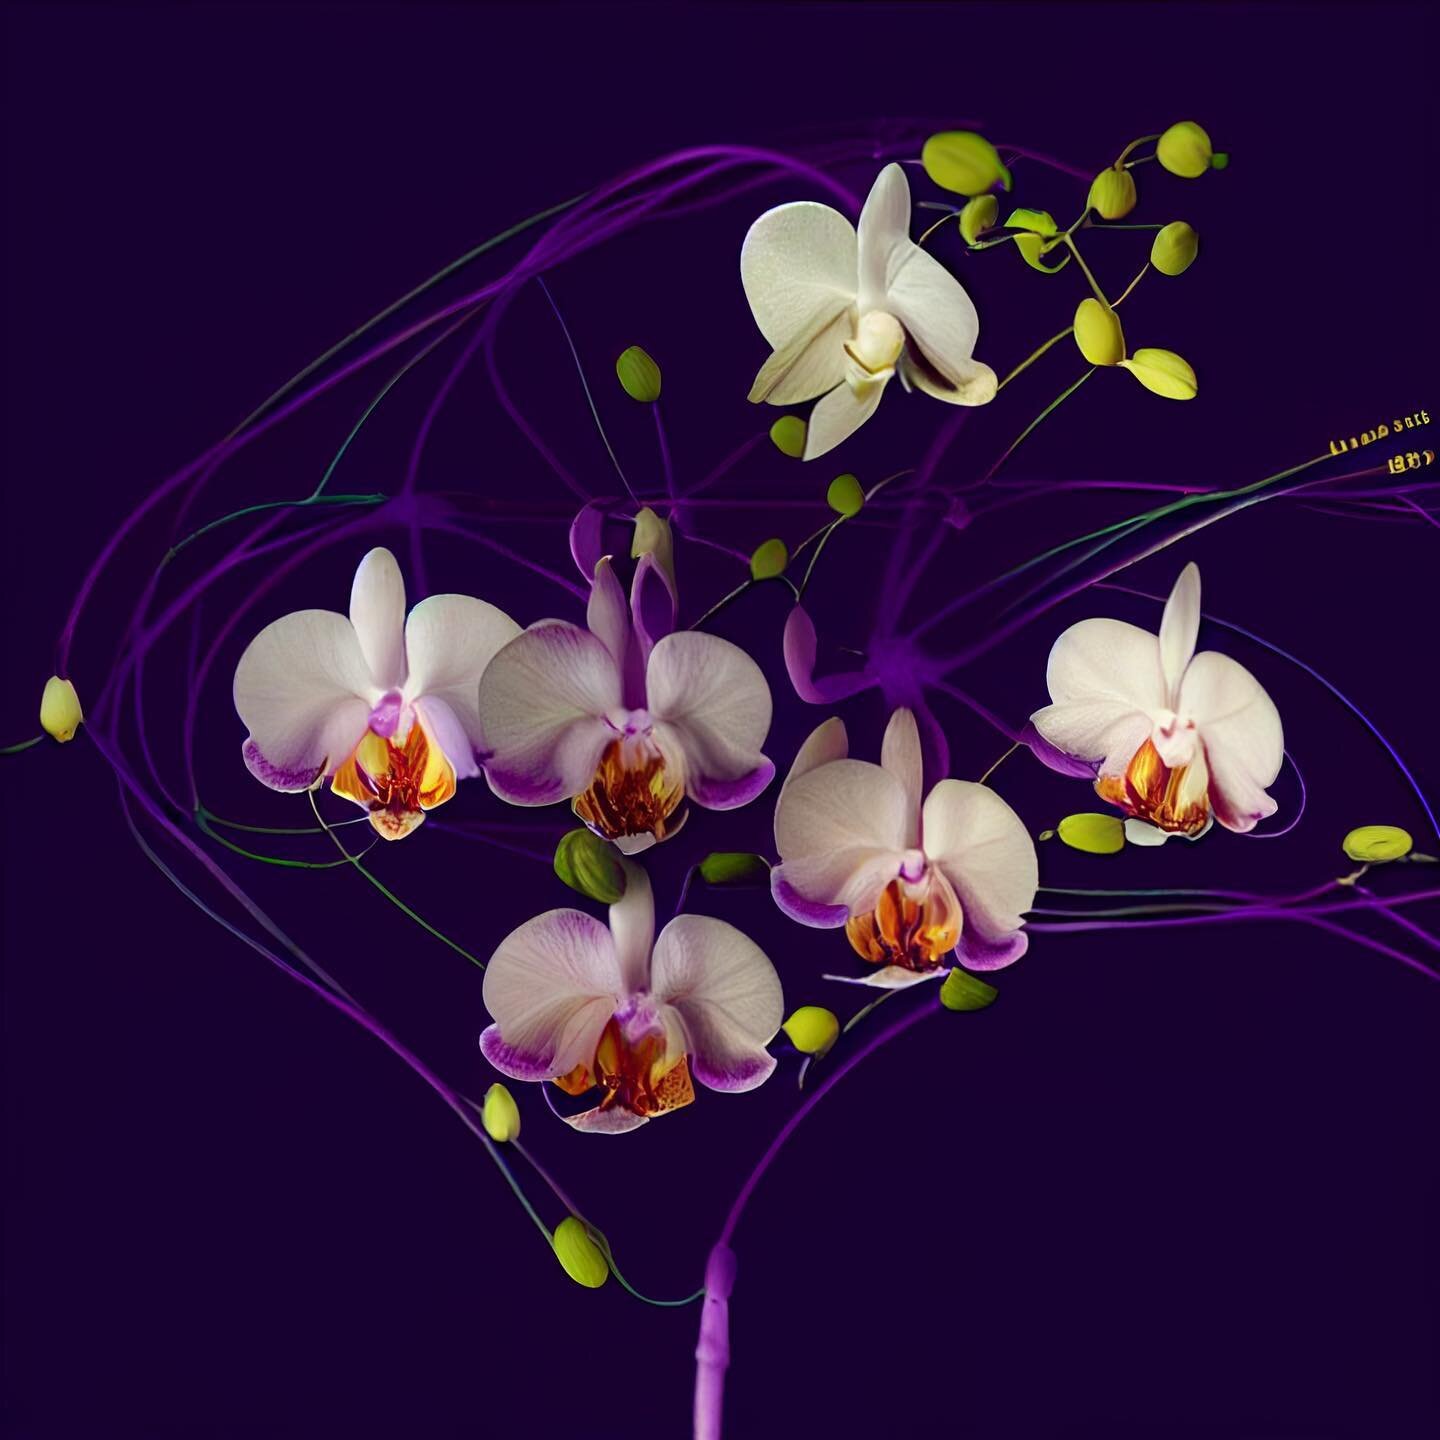 &ldquo;I don&rsquo;t want to belong&rdquo;

Neuro-floral art series by Jiyeon Kang using #Midjourney AI

#mood #feel #aiart #generativeart #flower #flowerphotography #flowerart #network #visualization #visualcomplexity #ai